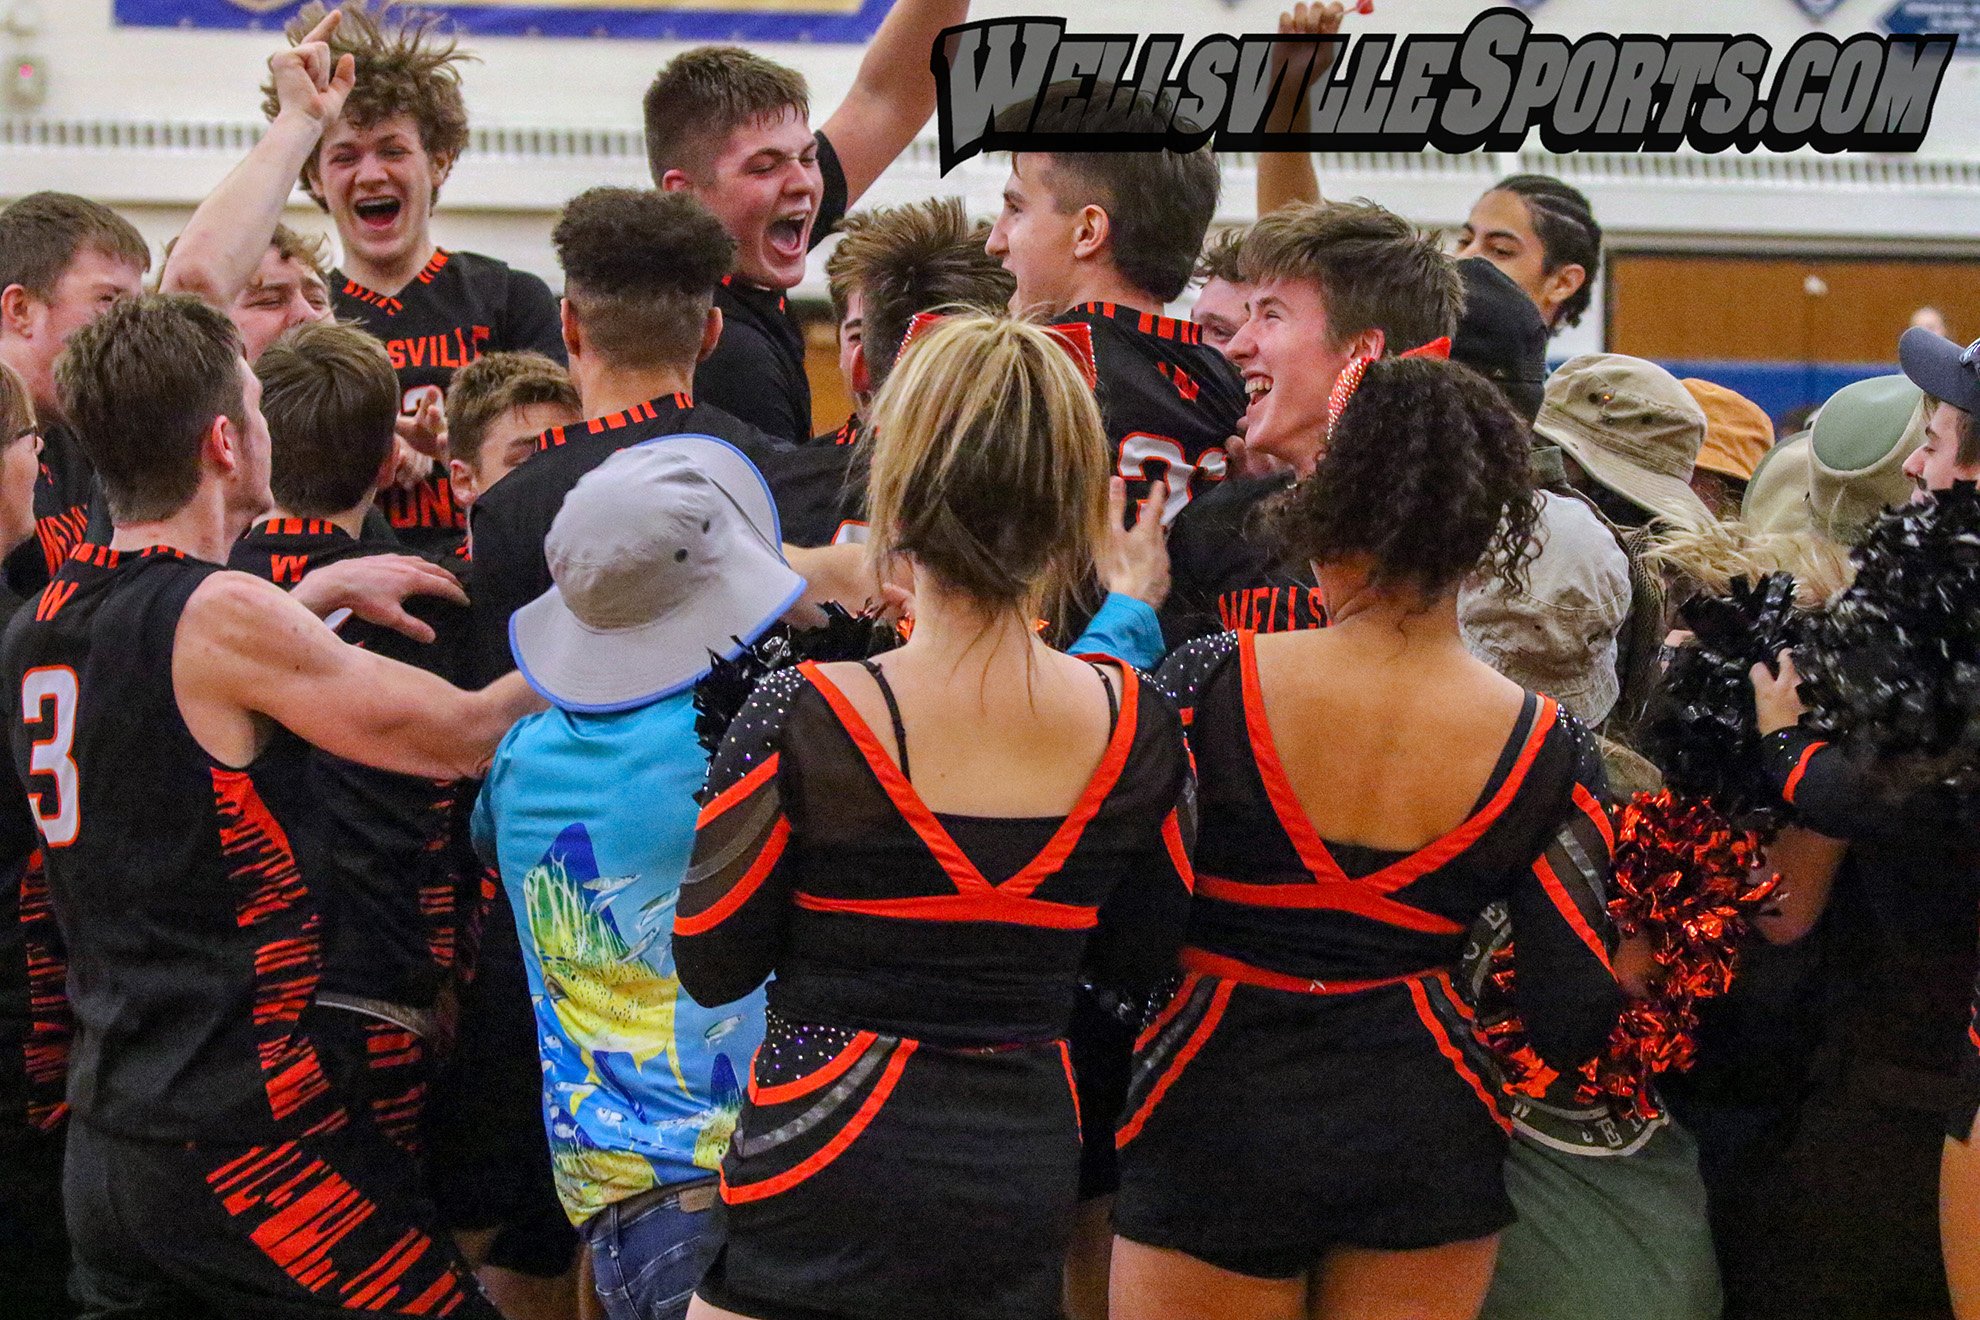  The Wellsville Lions come together to celebrate after the buzzer rang out on their 66-58 victory over the Mynderse Blue Devils to capture their third Class B2 Championship in seven years at Webster Schroeder on Saturday. The Lions will now face Clas